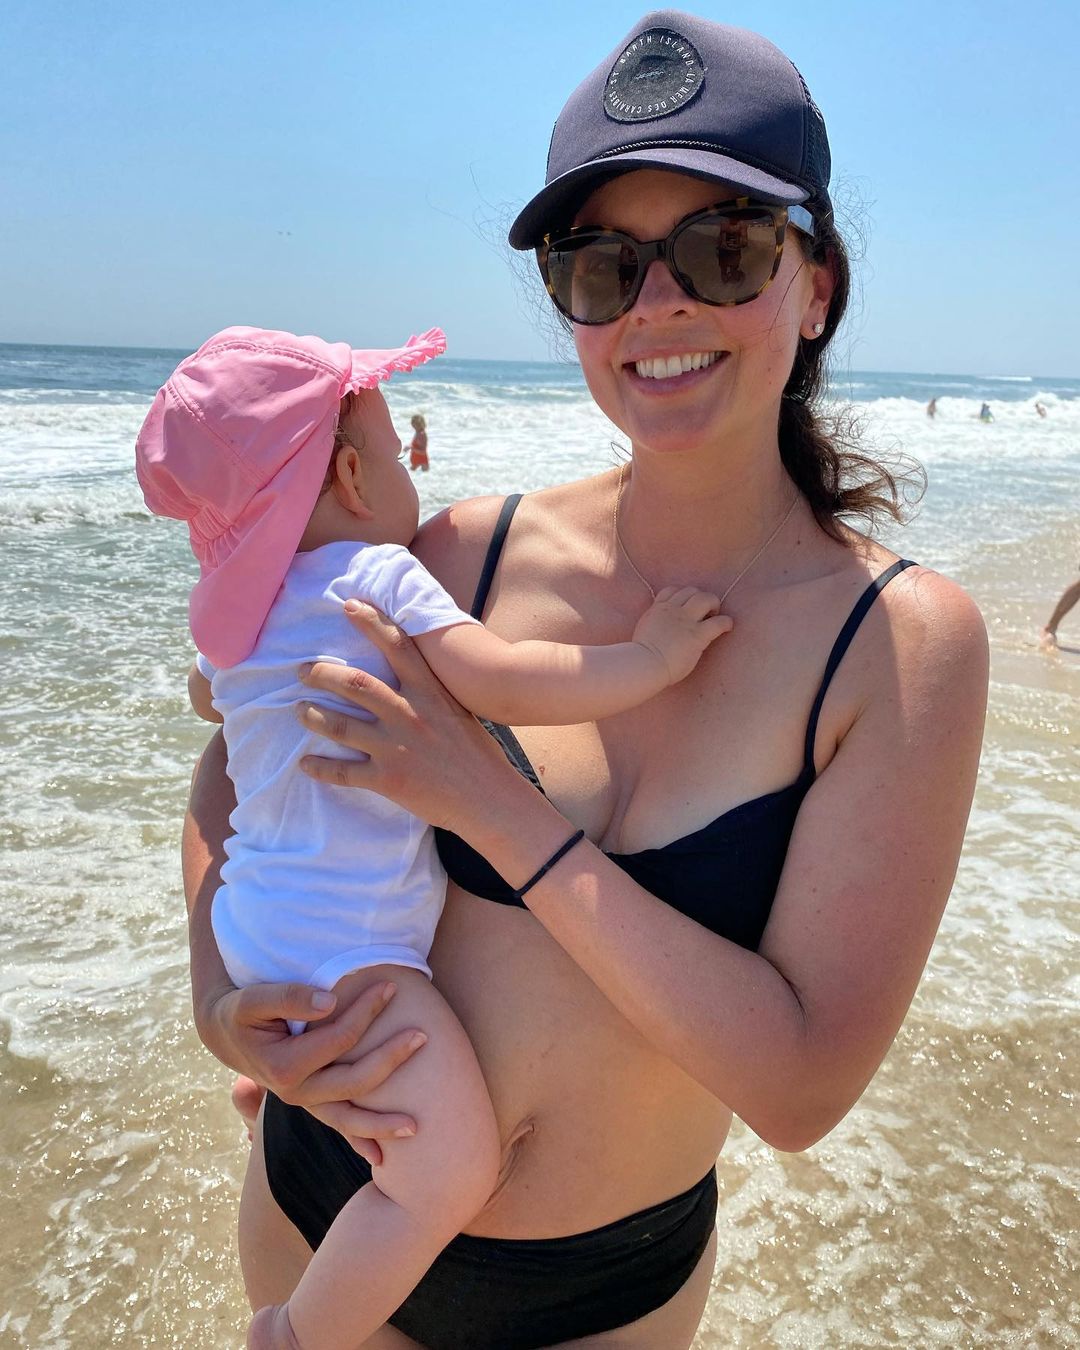 See Katie Lee Biegel and More Celeb Families' 2021 Beach Pics